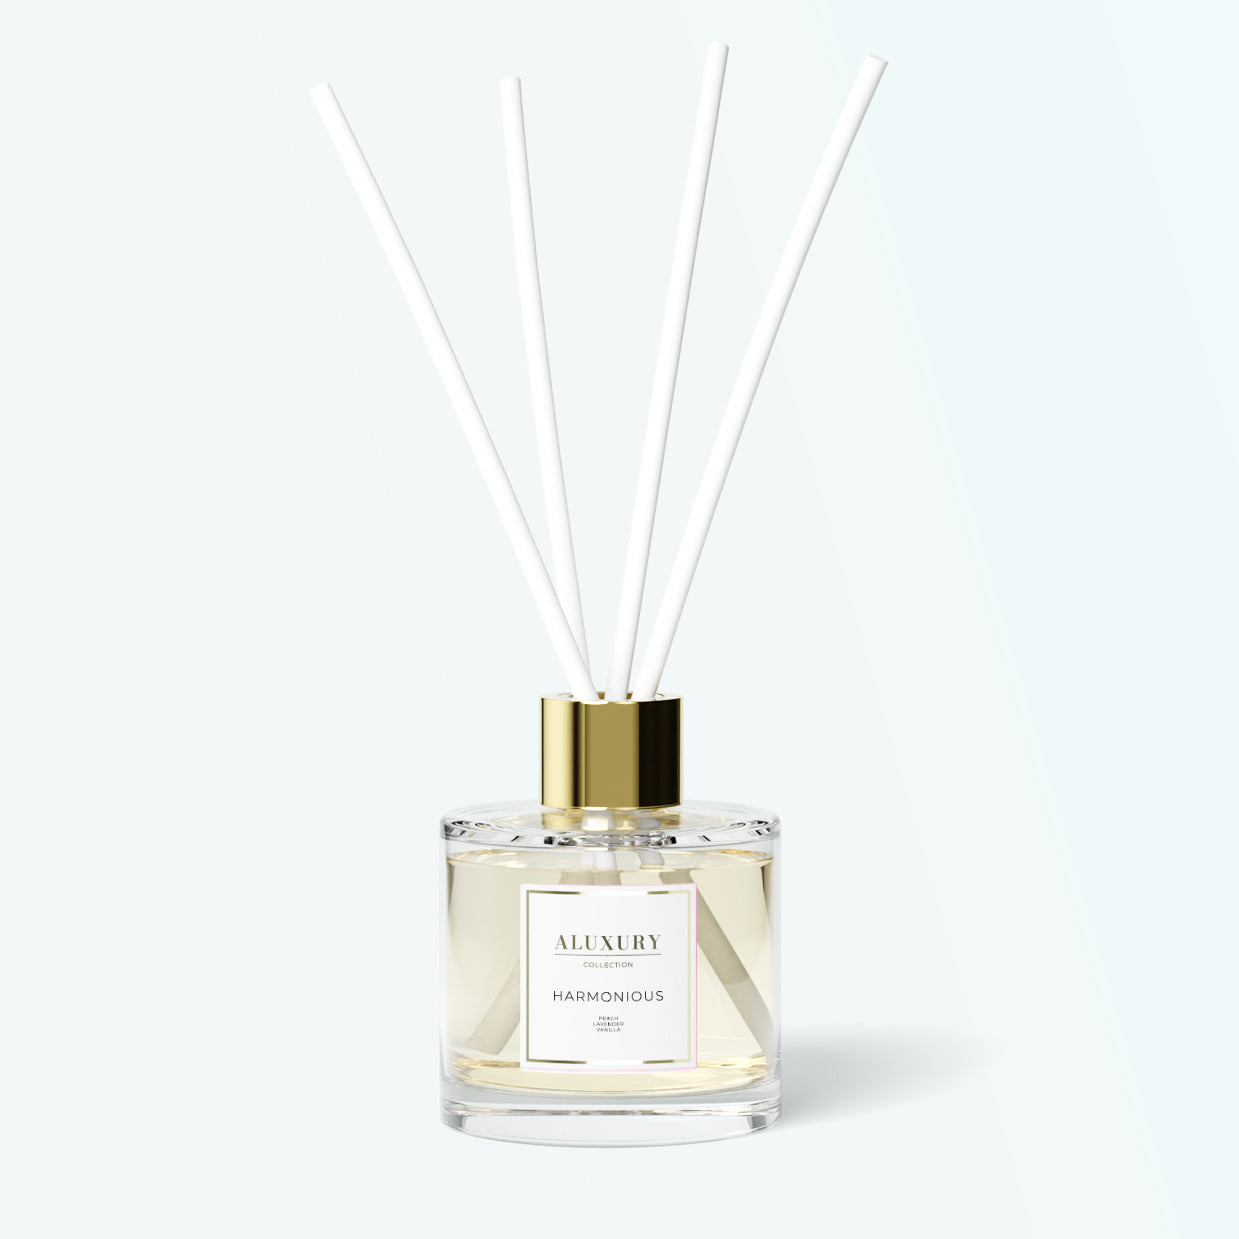 Harmonious glass luxury reed diffuser with white reeds by Aluxury